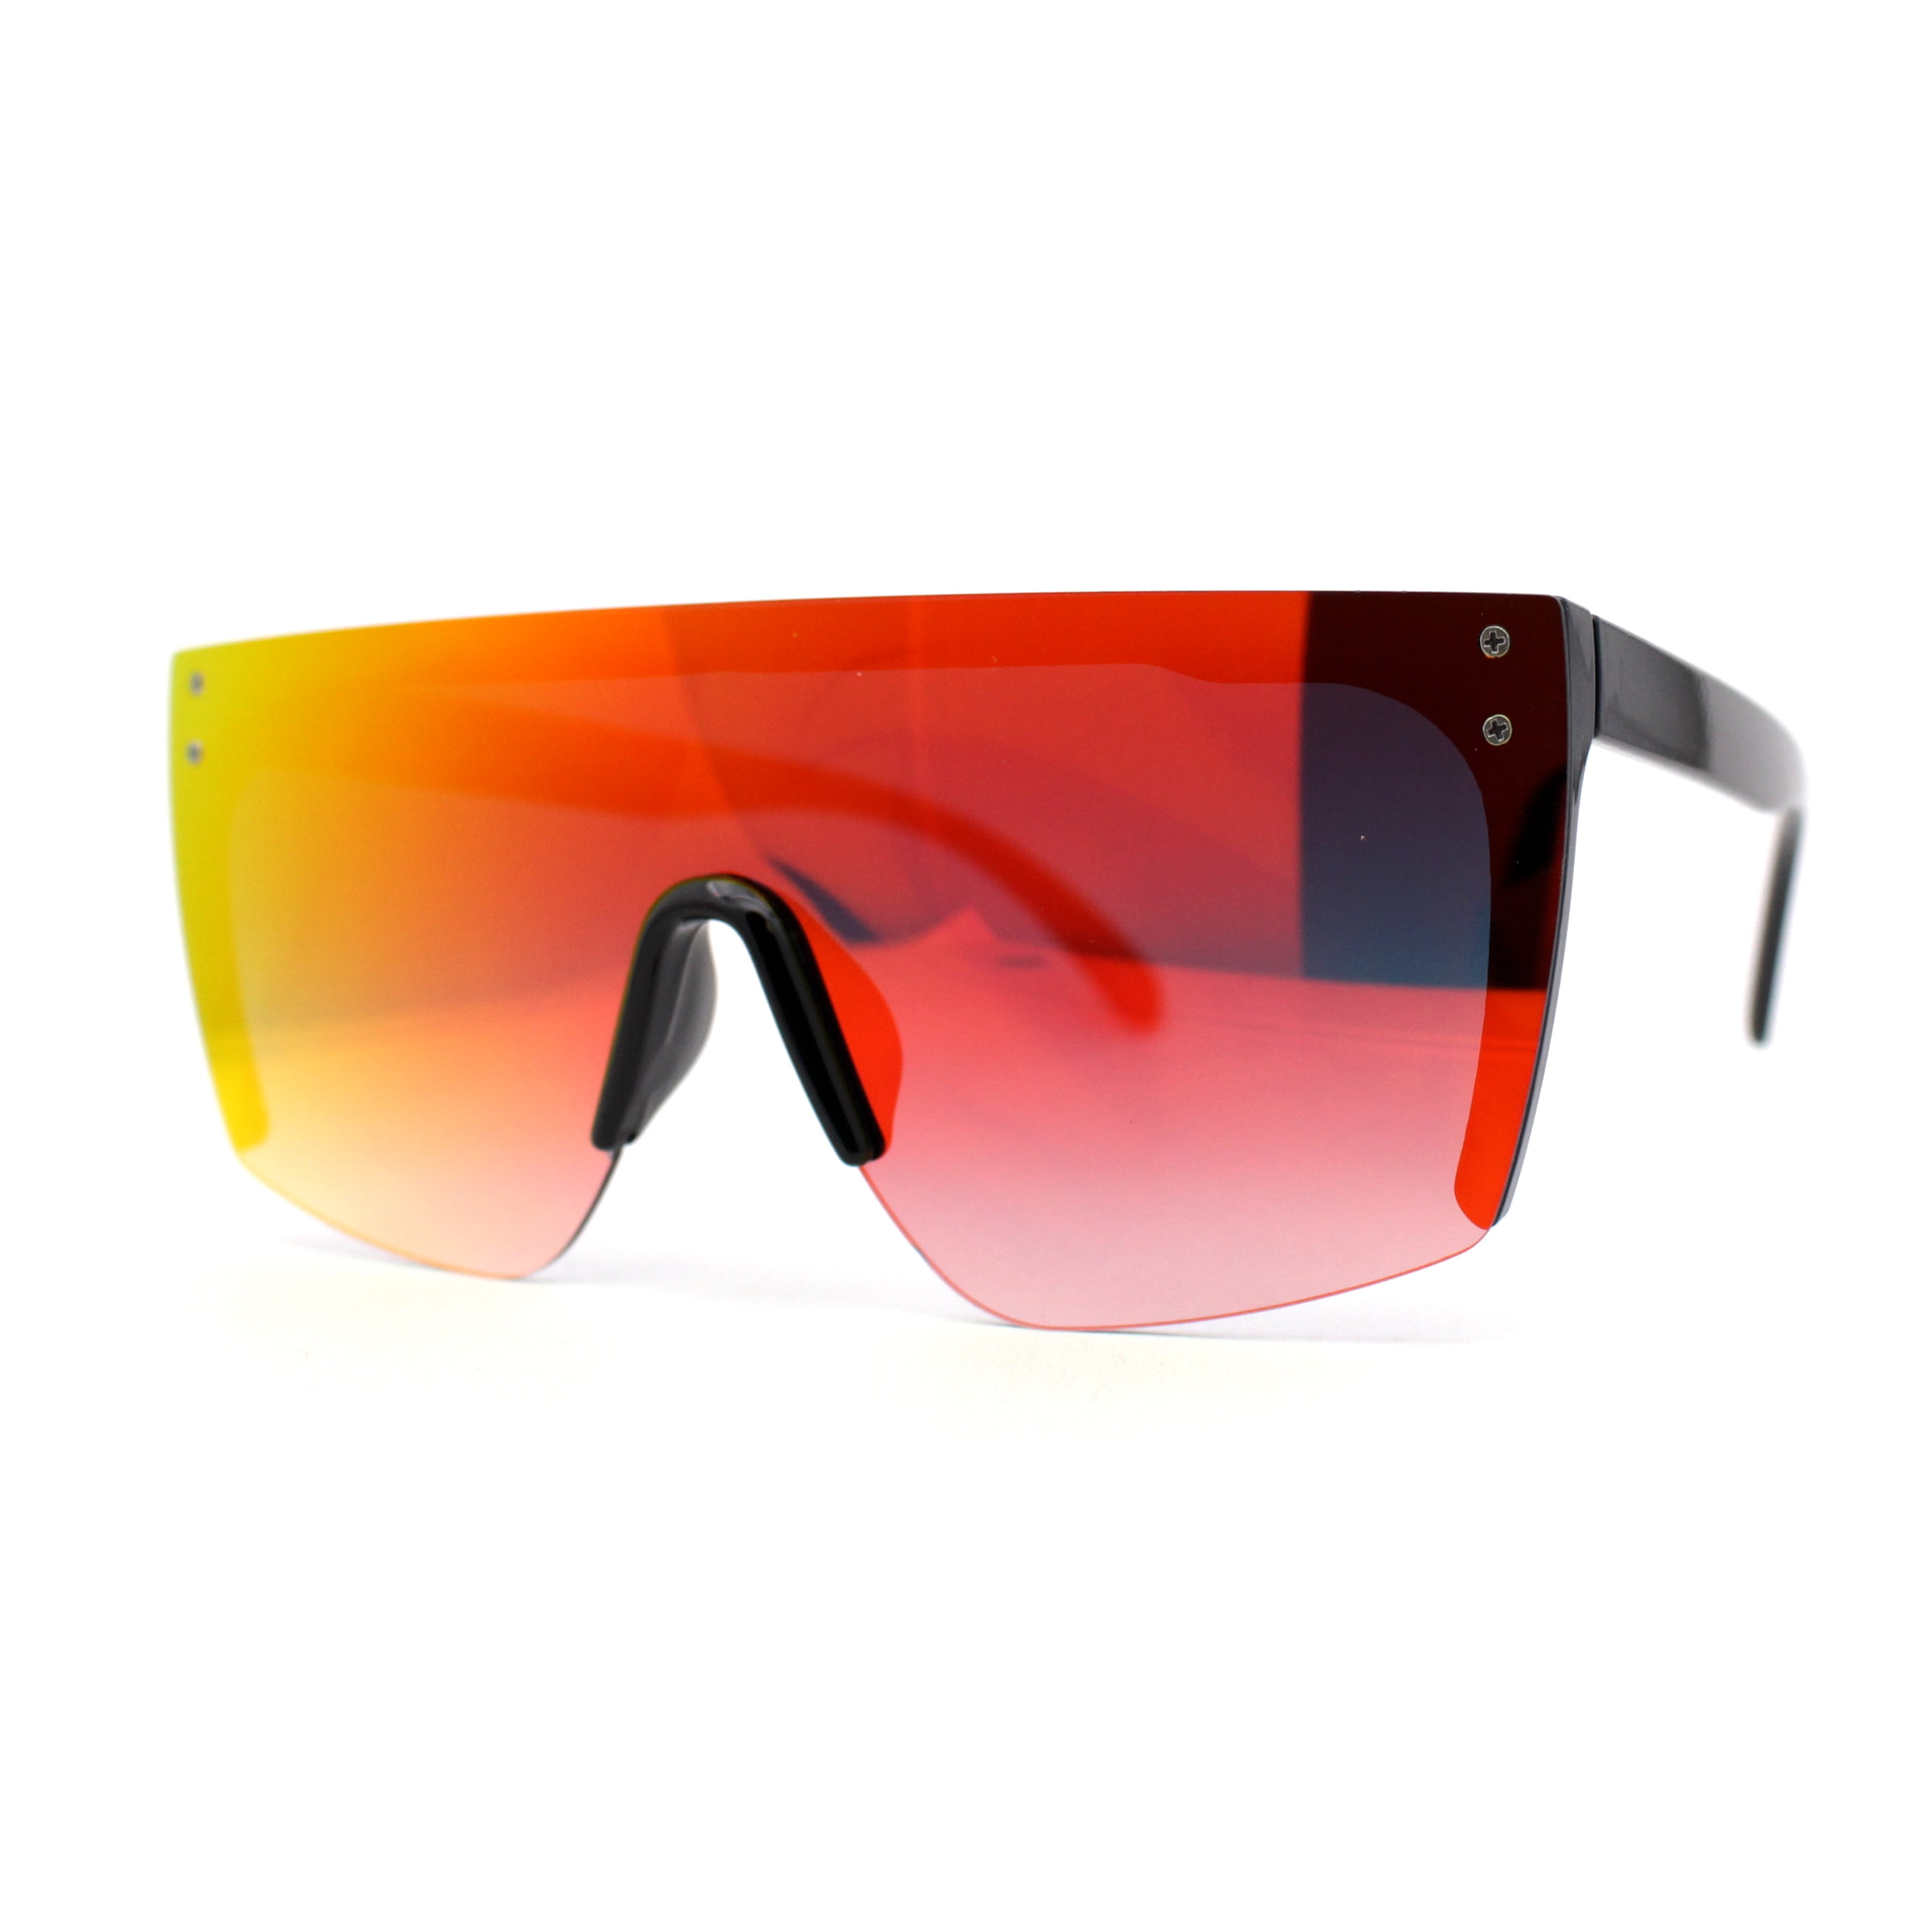 Ravs Sunglasses for Sports Leisure Cycling Glasses Bike Goggles Red 